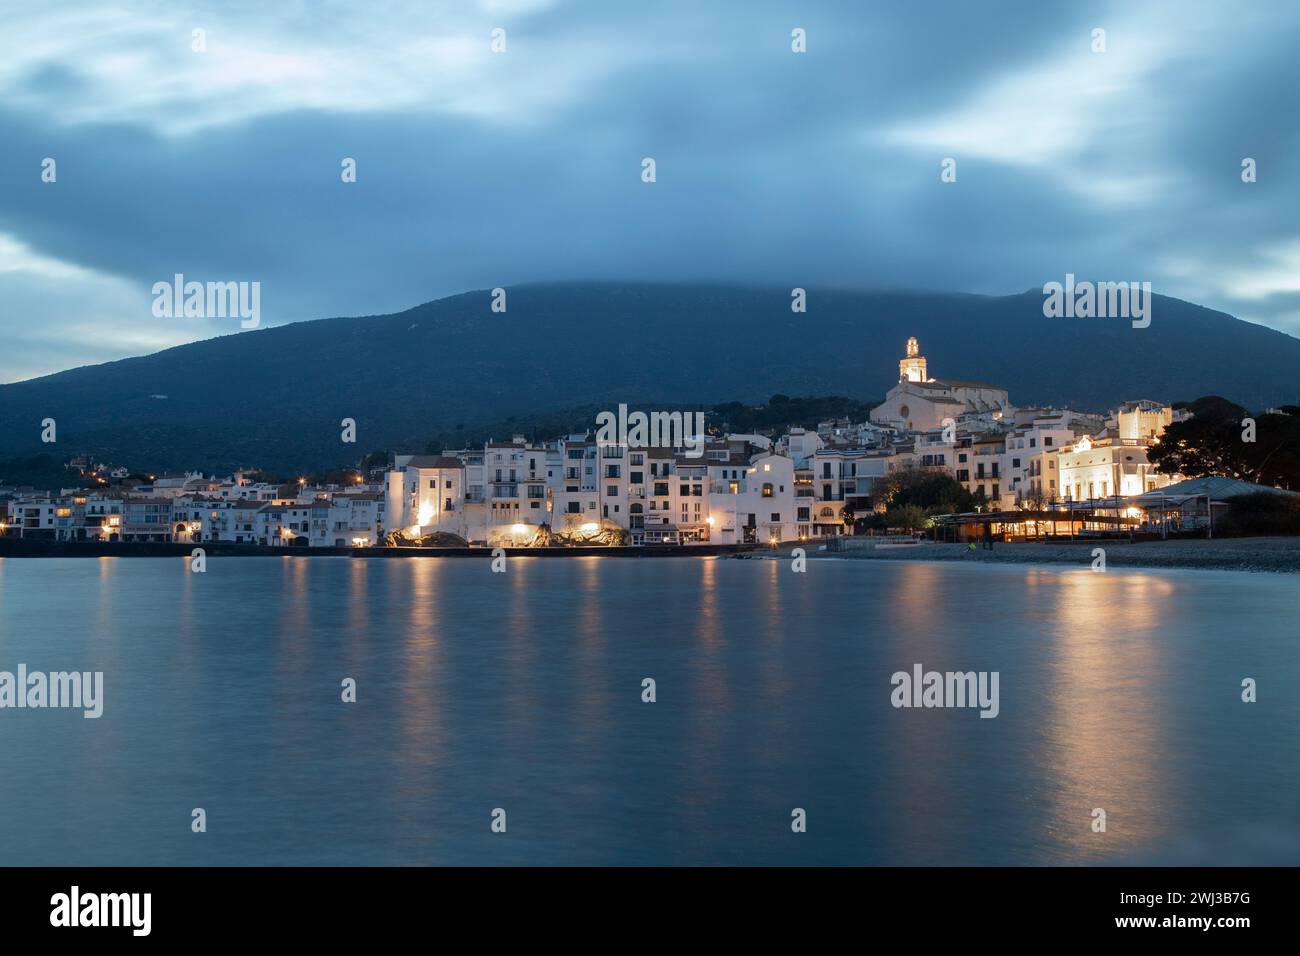 The Cadaques town in Catalonia by sea at dusk with mountains in background Stock Photo